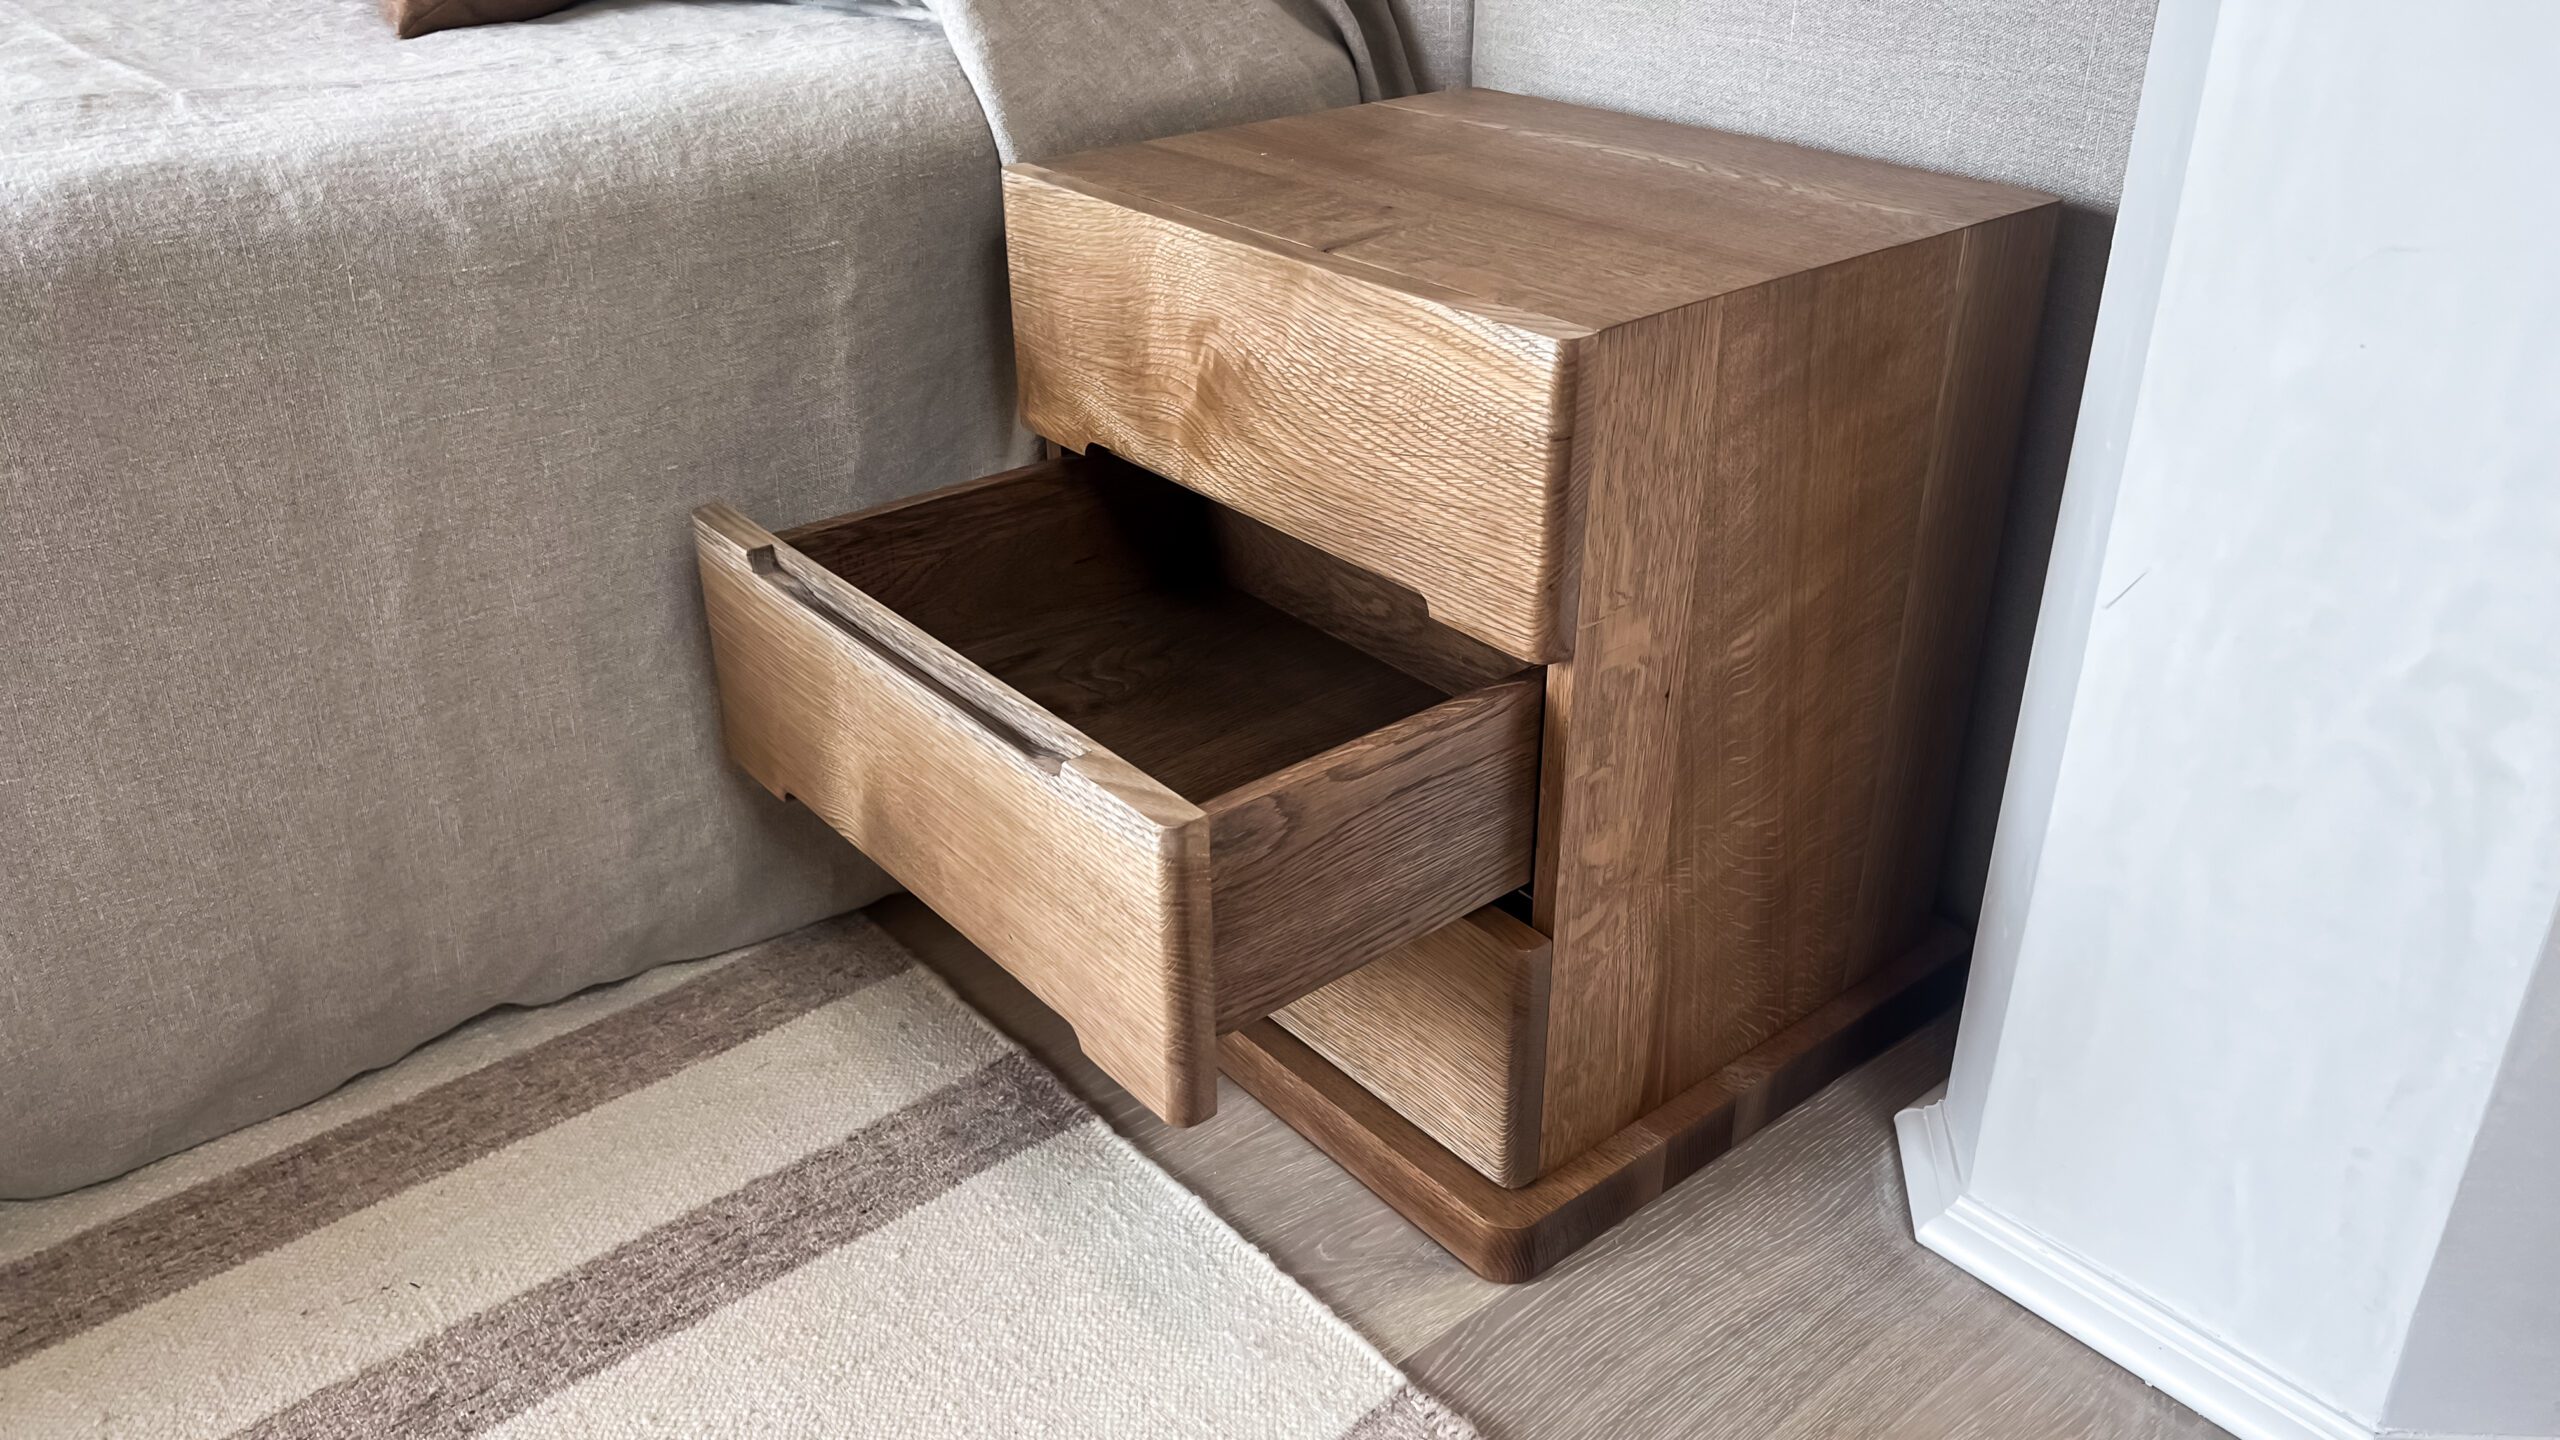 Opened Bedside Table with Integrated Pulls on Drawers